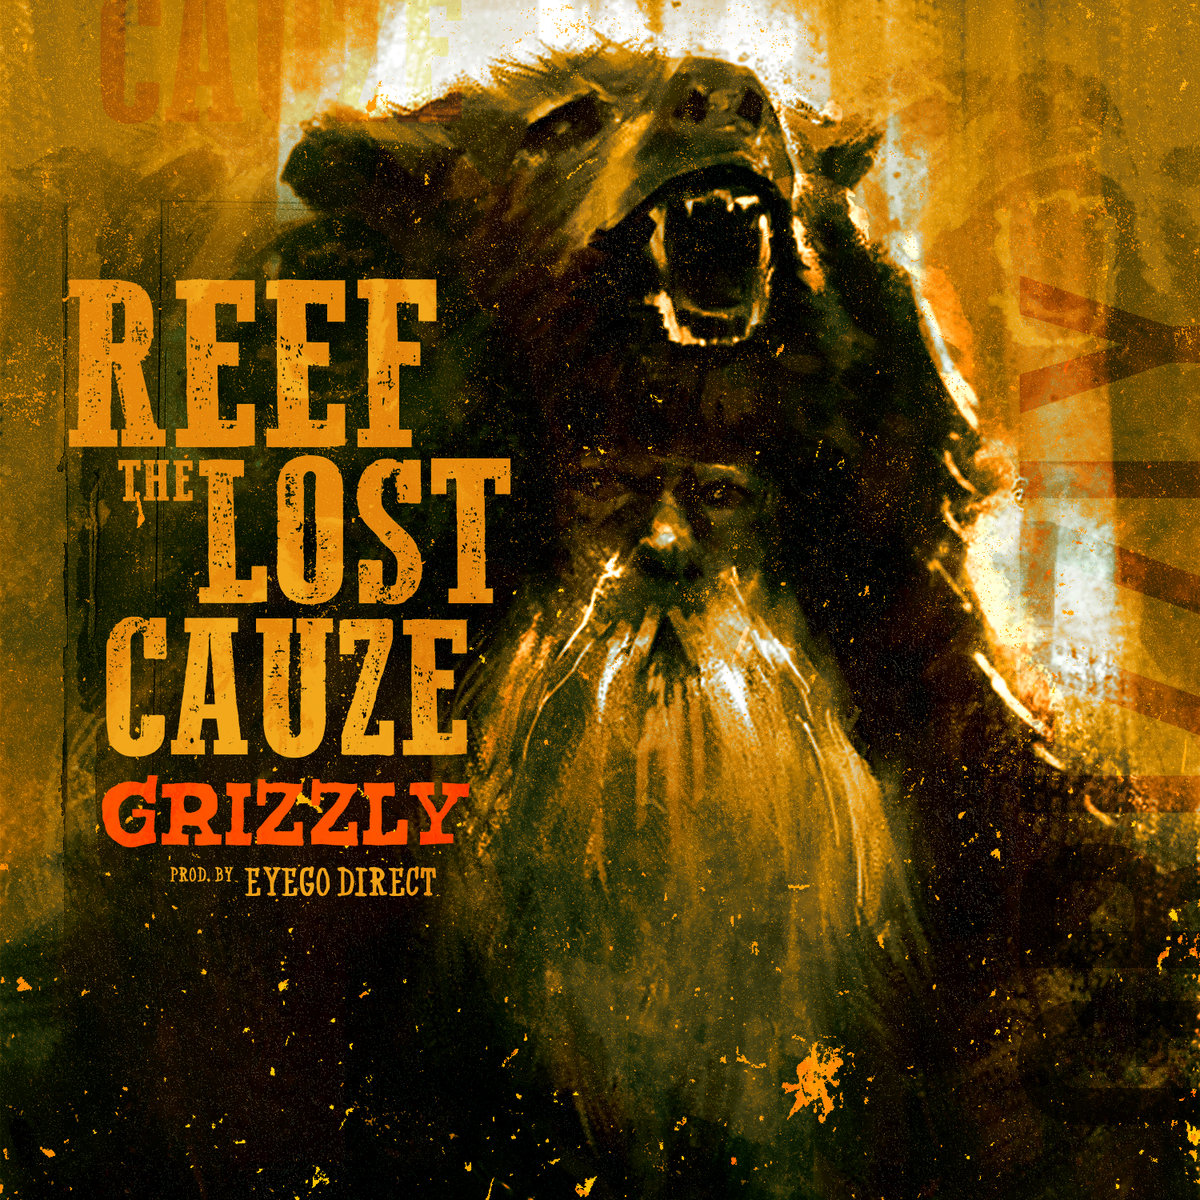 reef-the-lost-cauze-grizzly